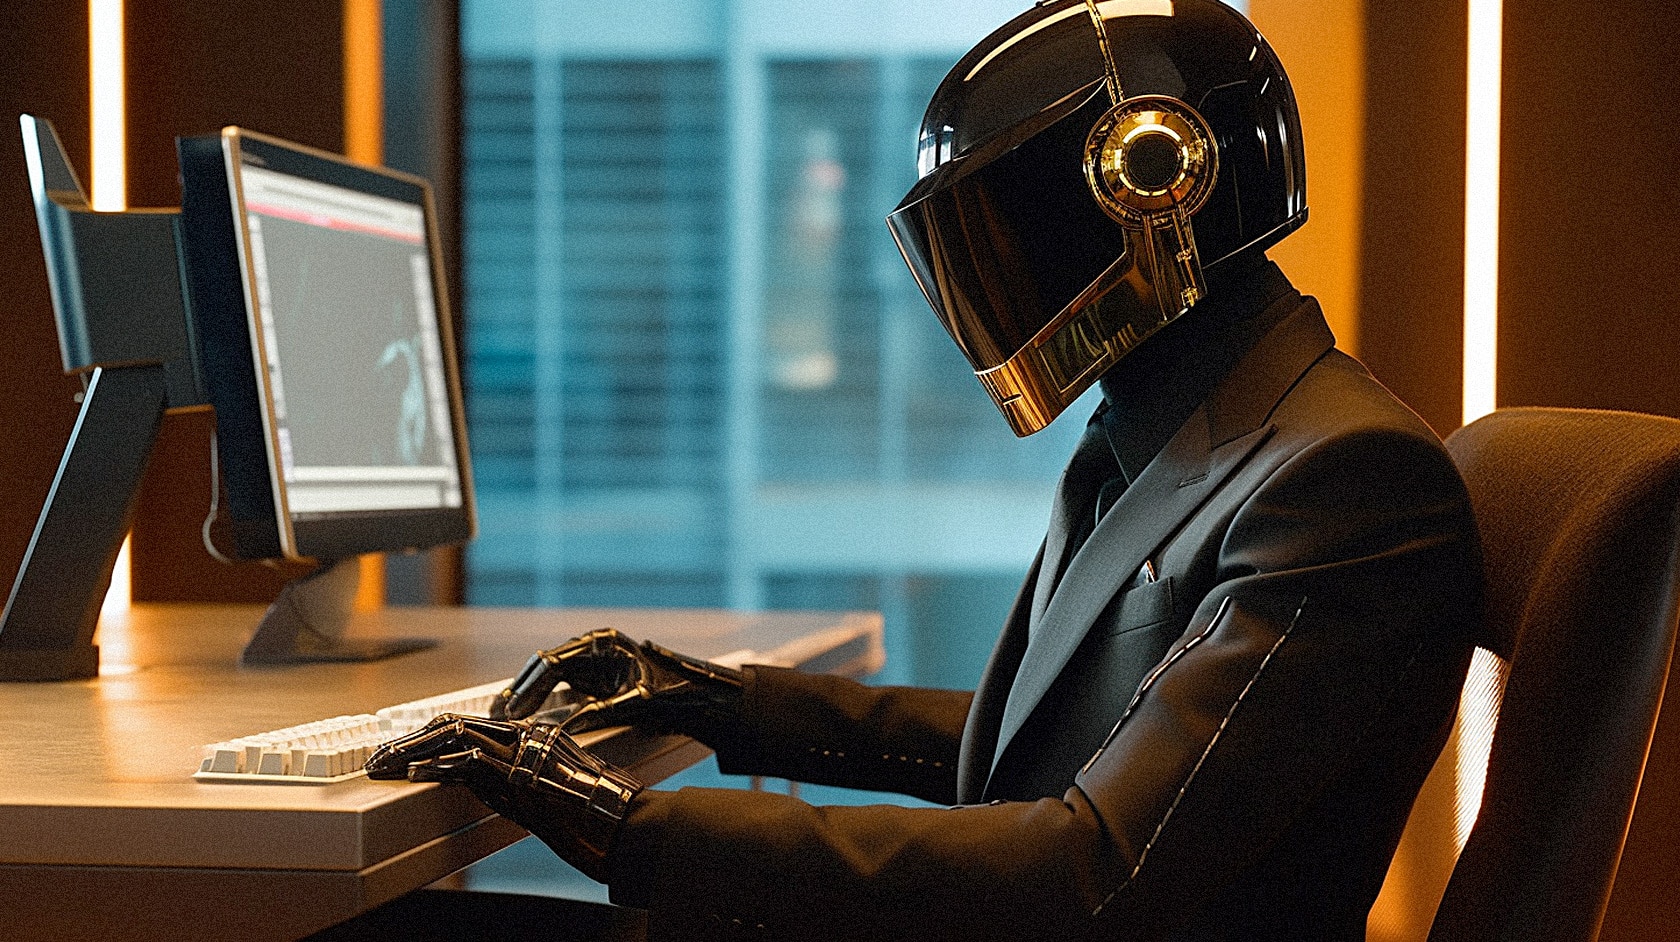 Android businessman in a black suit sitting in an office typing on a computer